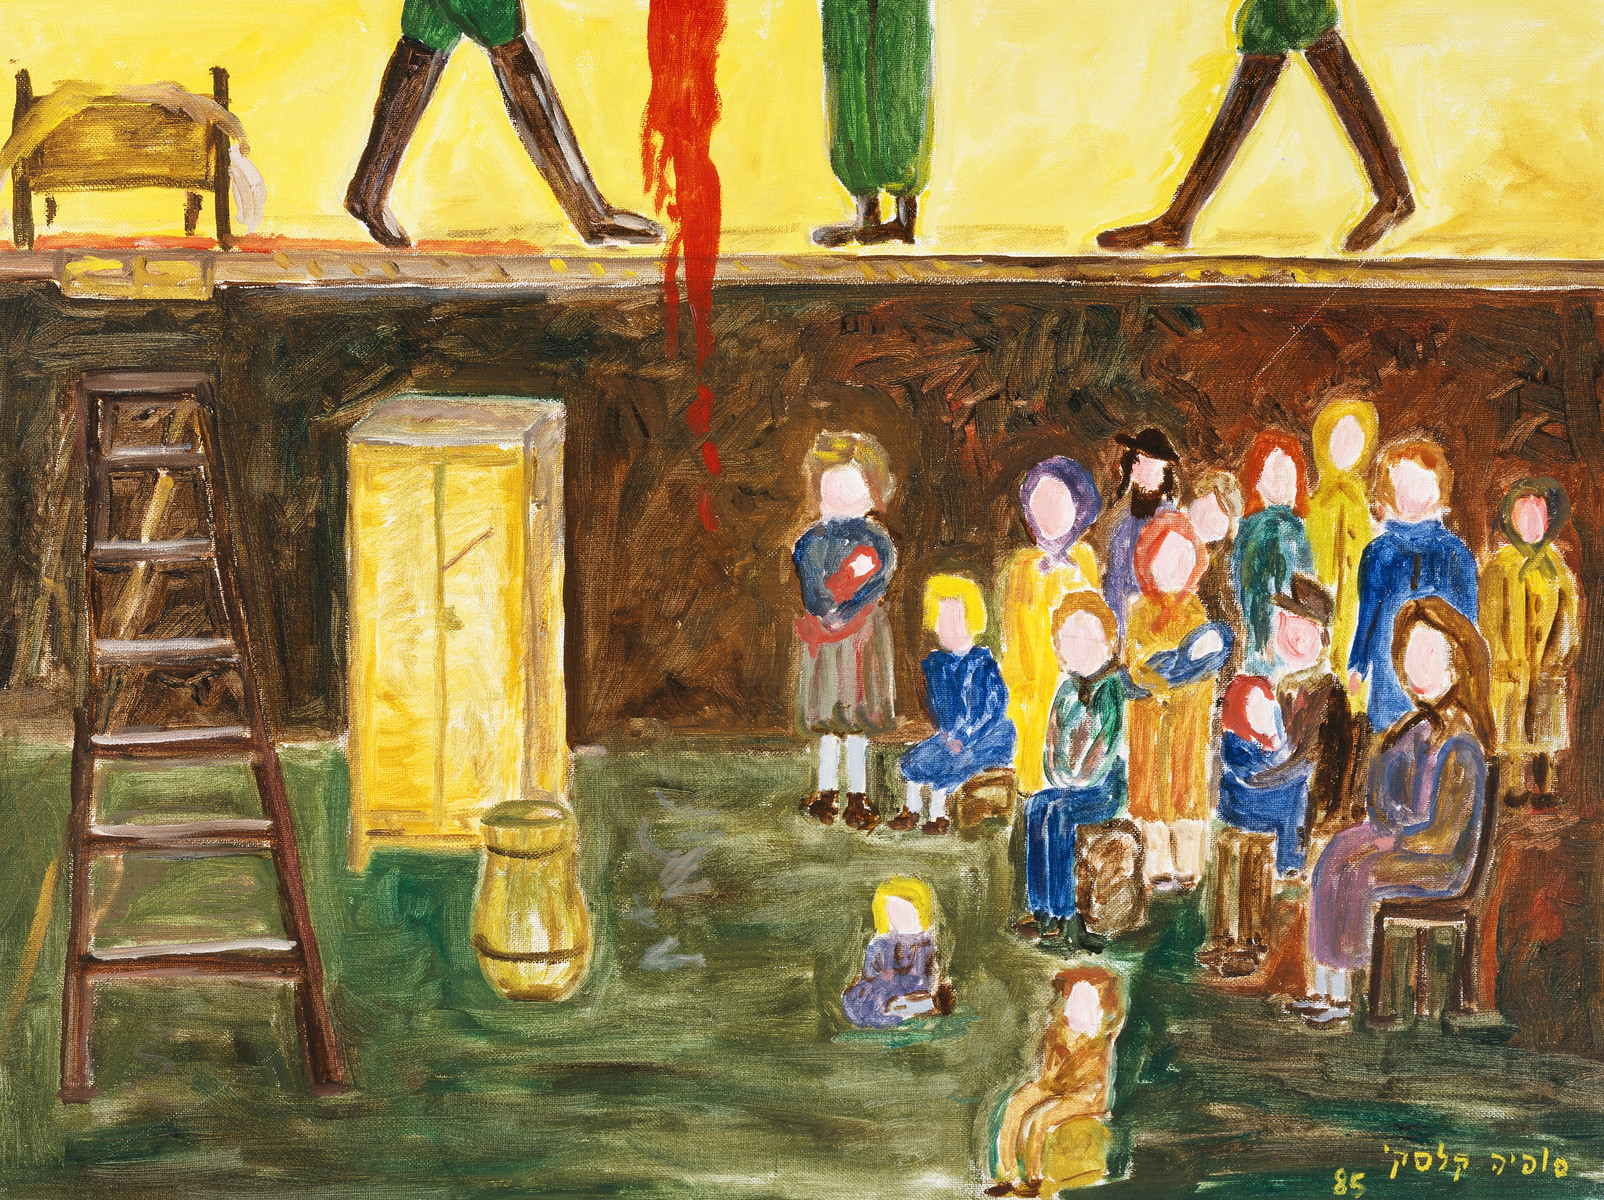 A painting by artist Sophia Kalski depicting the February 1943 Aktion in the Lwow ghetto.  The artist writes about this image "We are in the bunker."